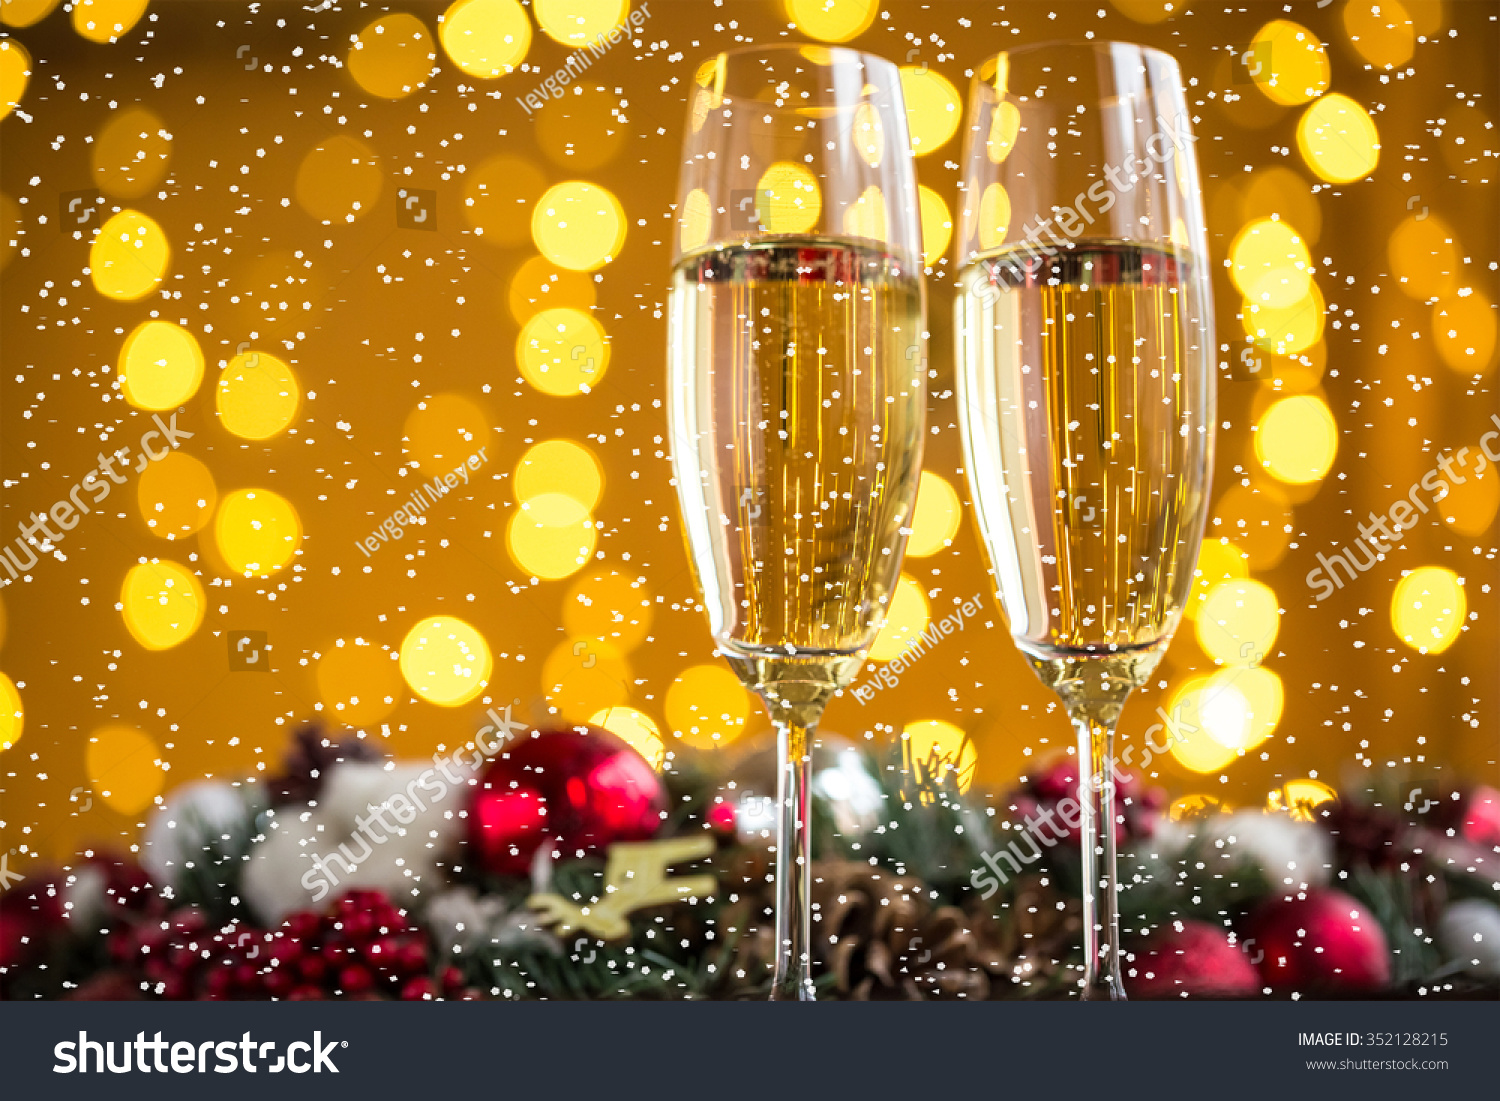 Two champagne glass on christmas bokeh background with snow #352128215